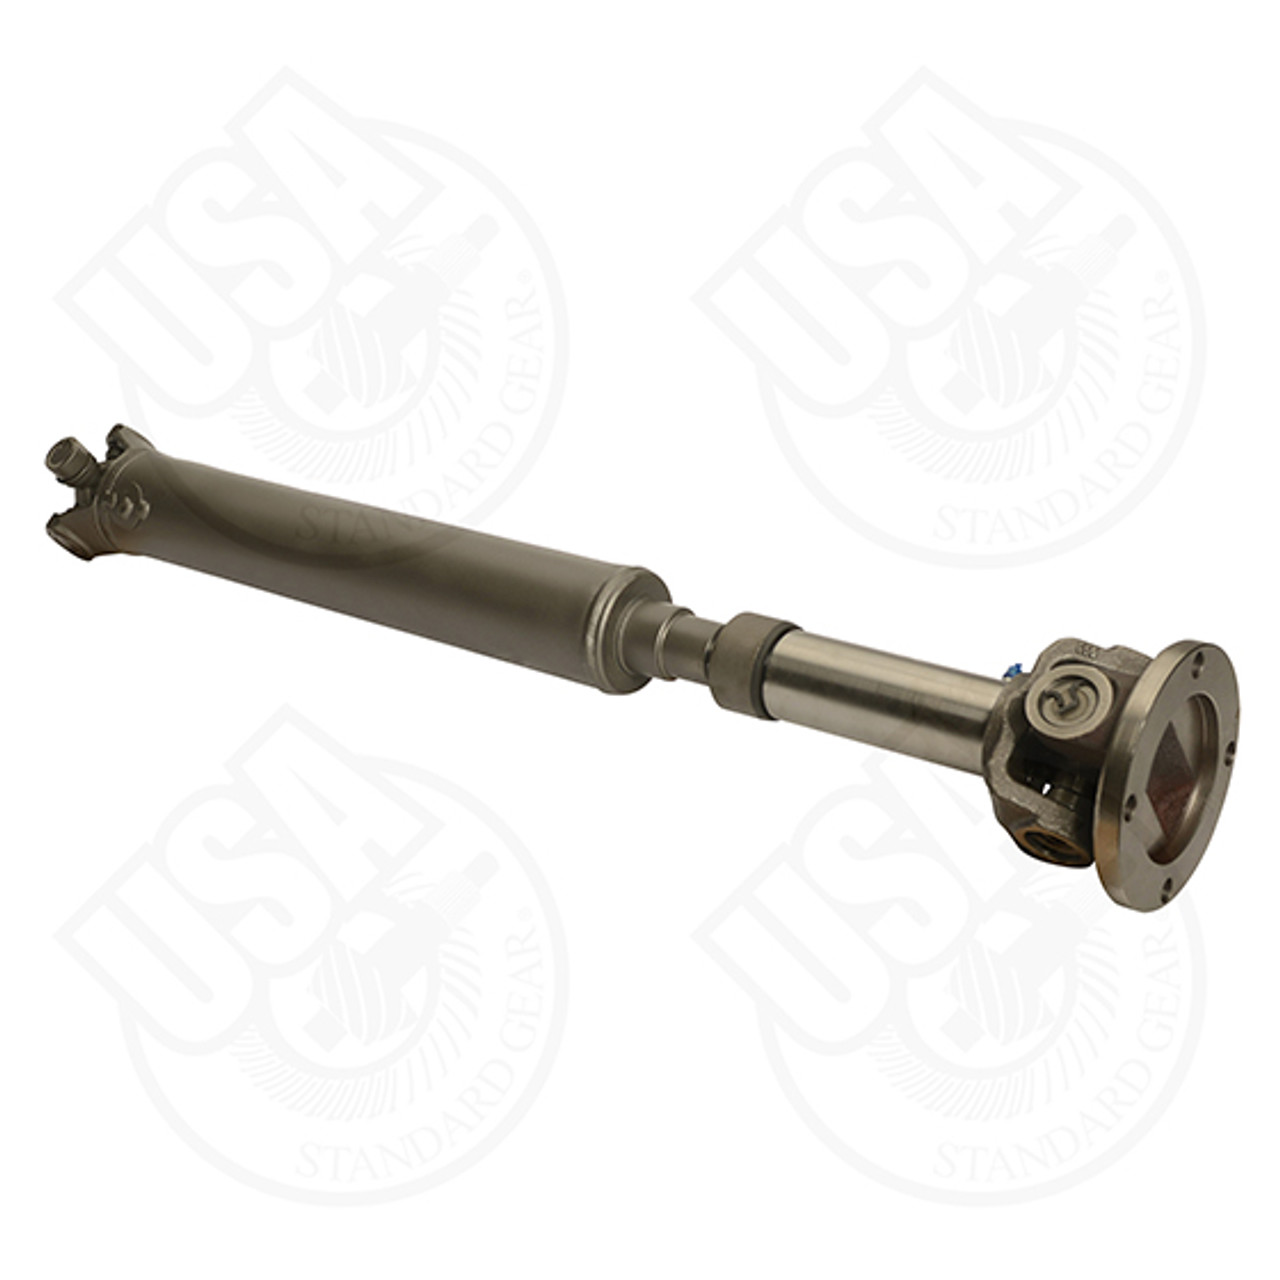 NEW USA Standard Front Driveshaft for GM Suburban, 29-1/2" Center to Center